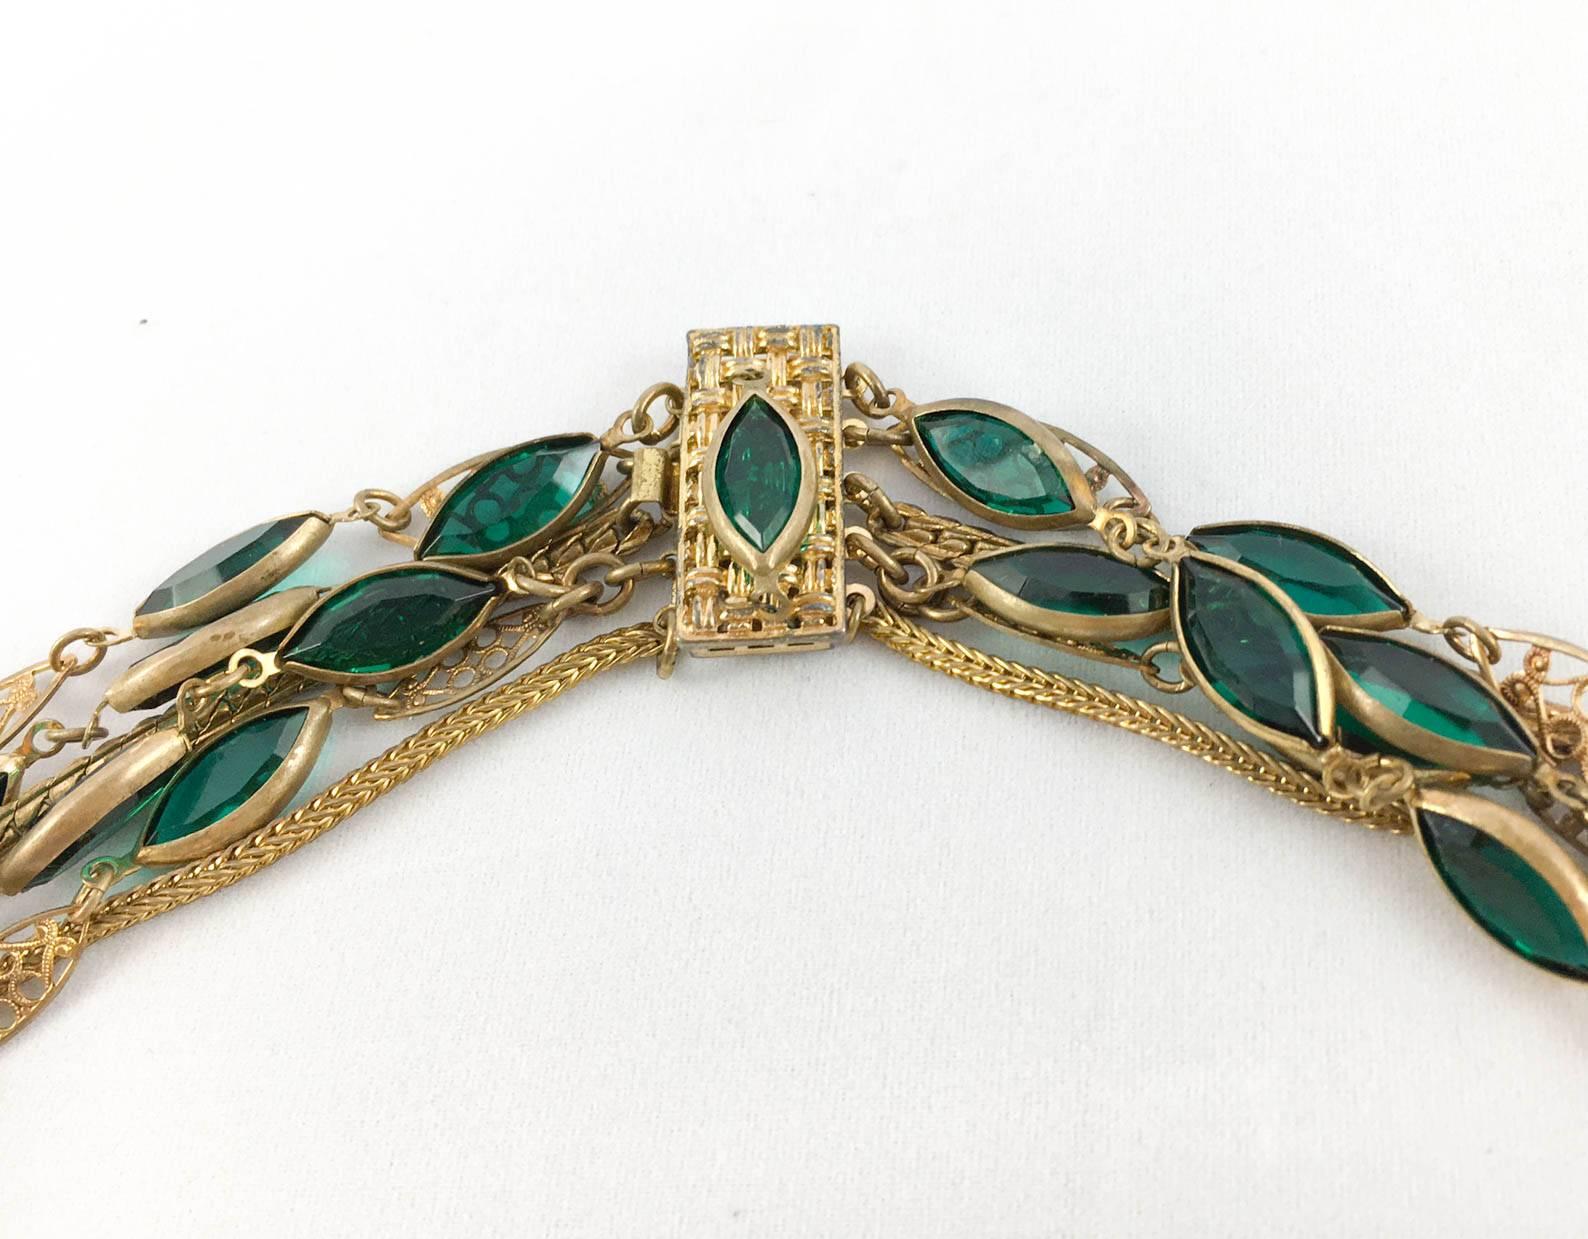 Multi-Strand Gold-Toned and Green Paste Necklace - 1940s/1950s For Sale 2